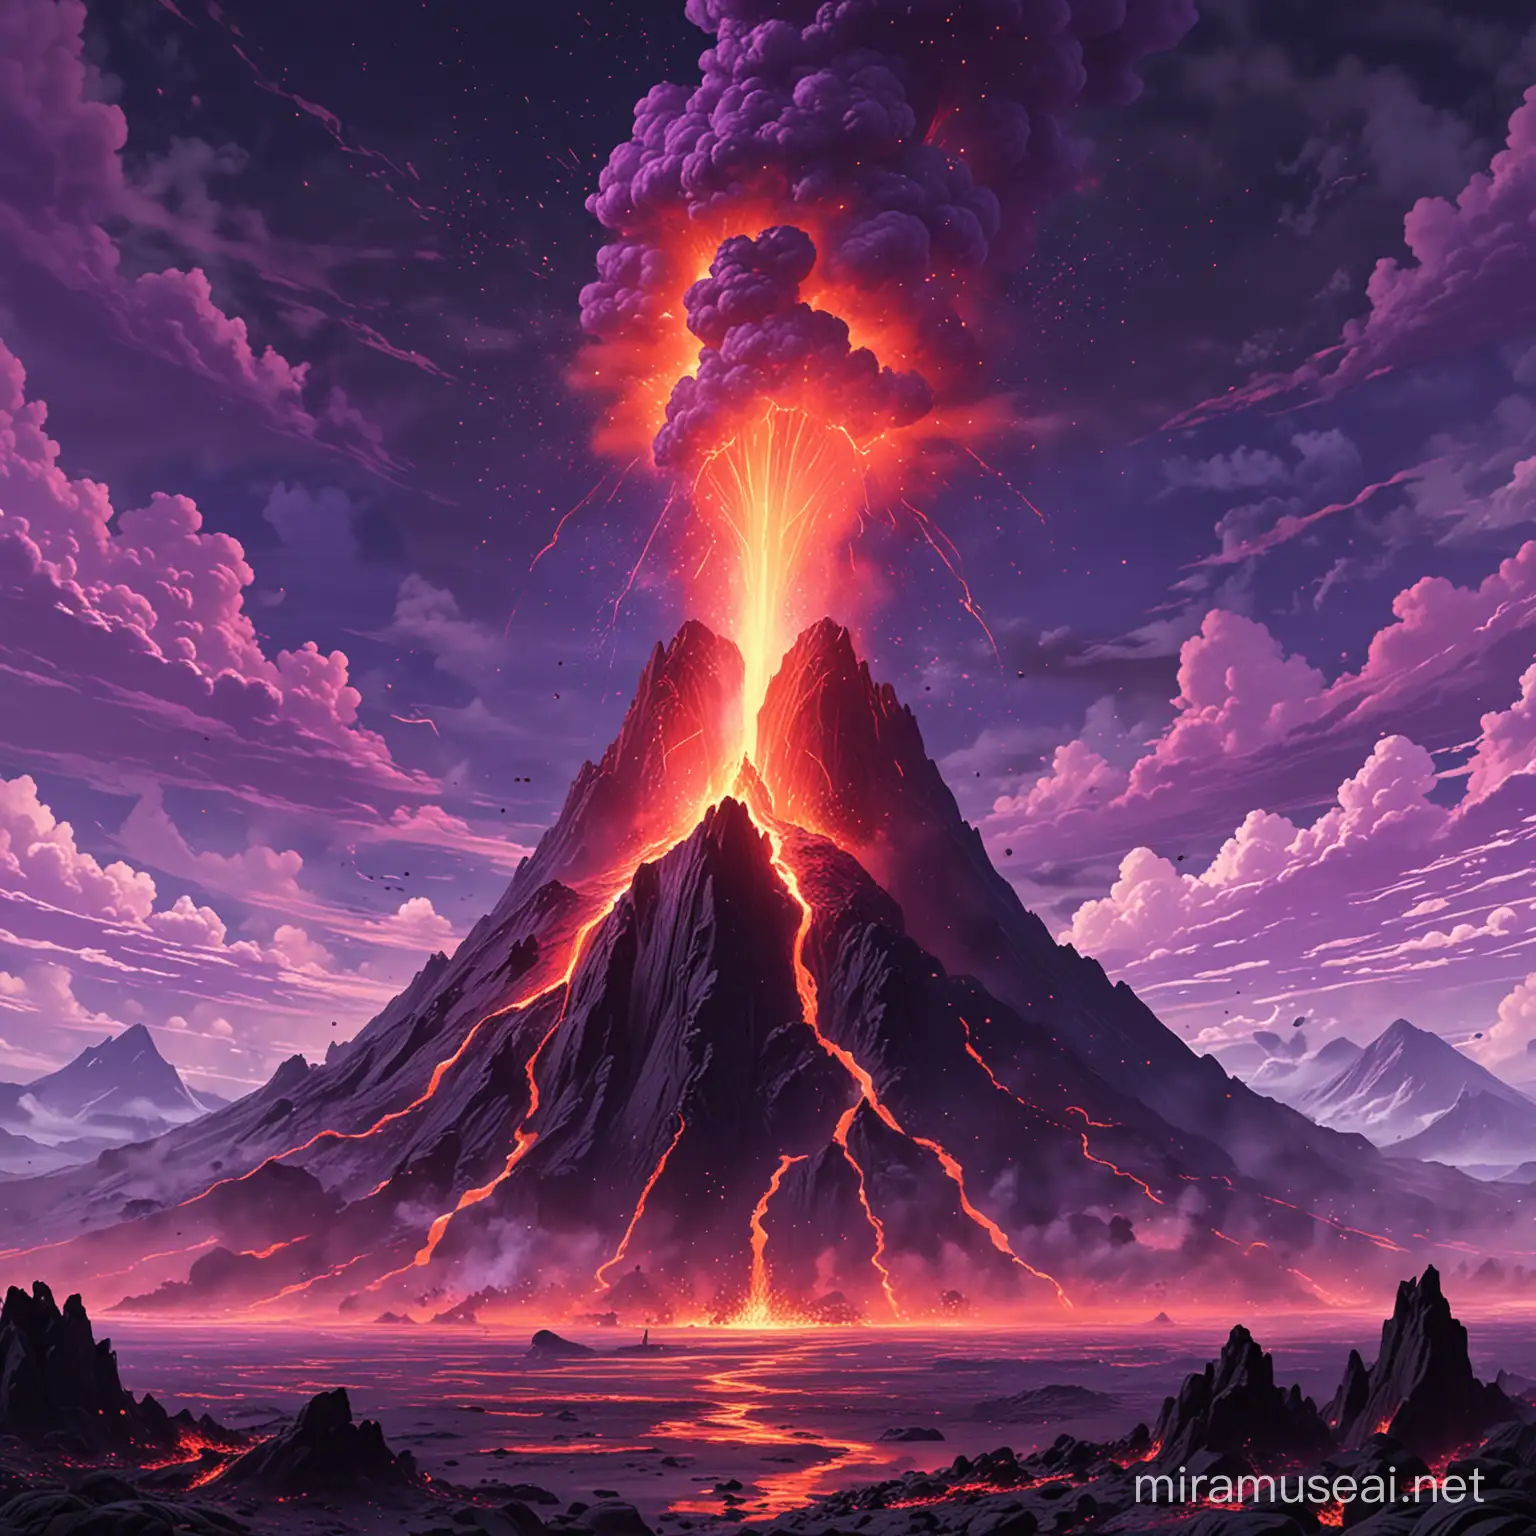 a large and tall volcano with a purple-colored lava explosion. Do it anime style